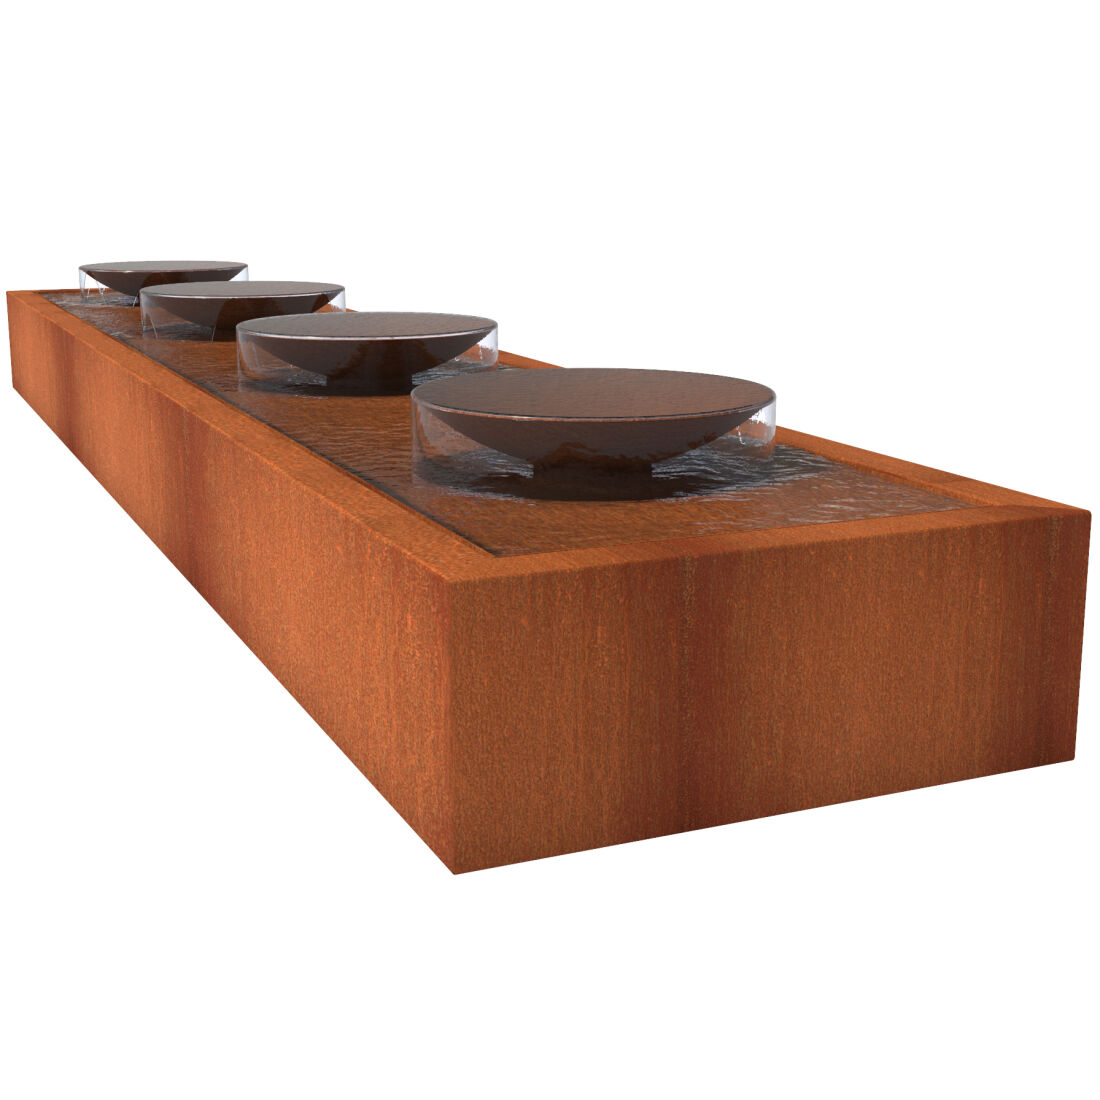 corten steel water table with water bowl